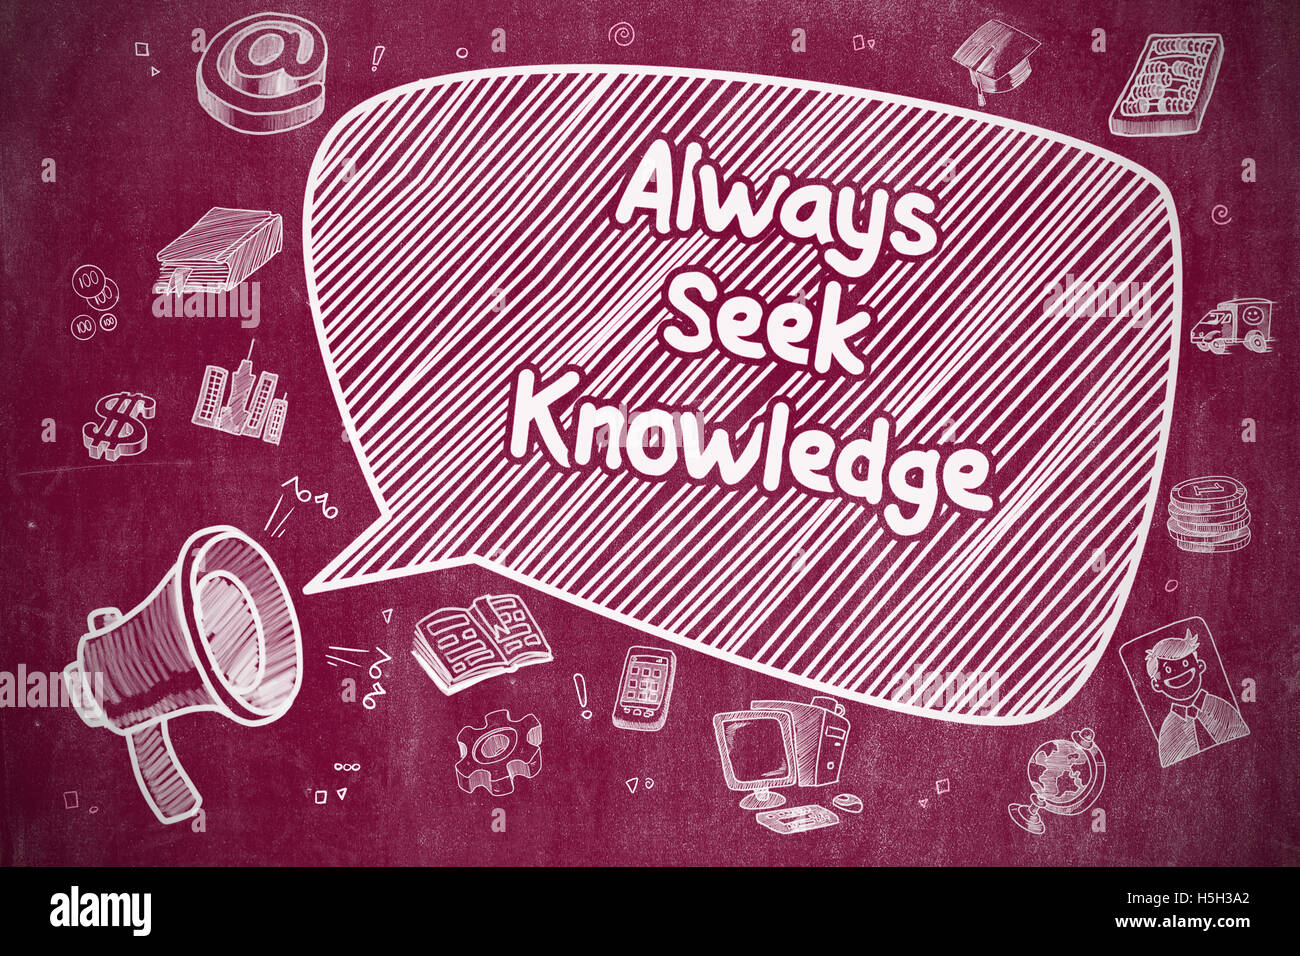 Always Seek Knowledge - Business Concept. Stock Photo